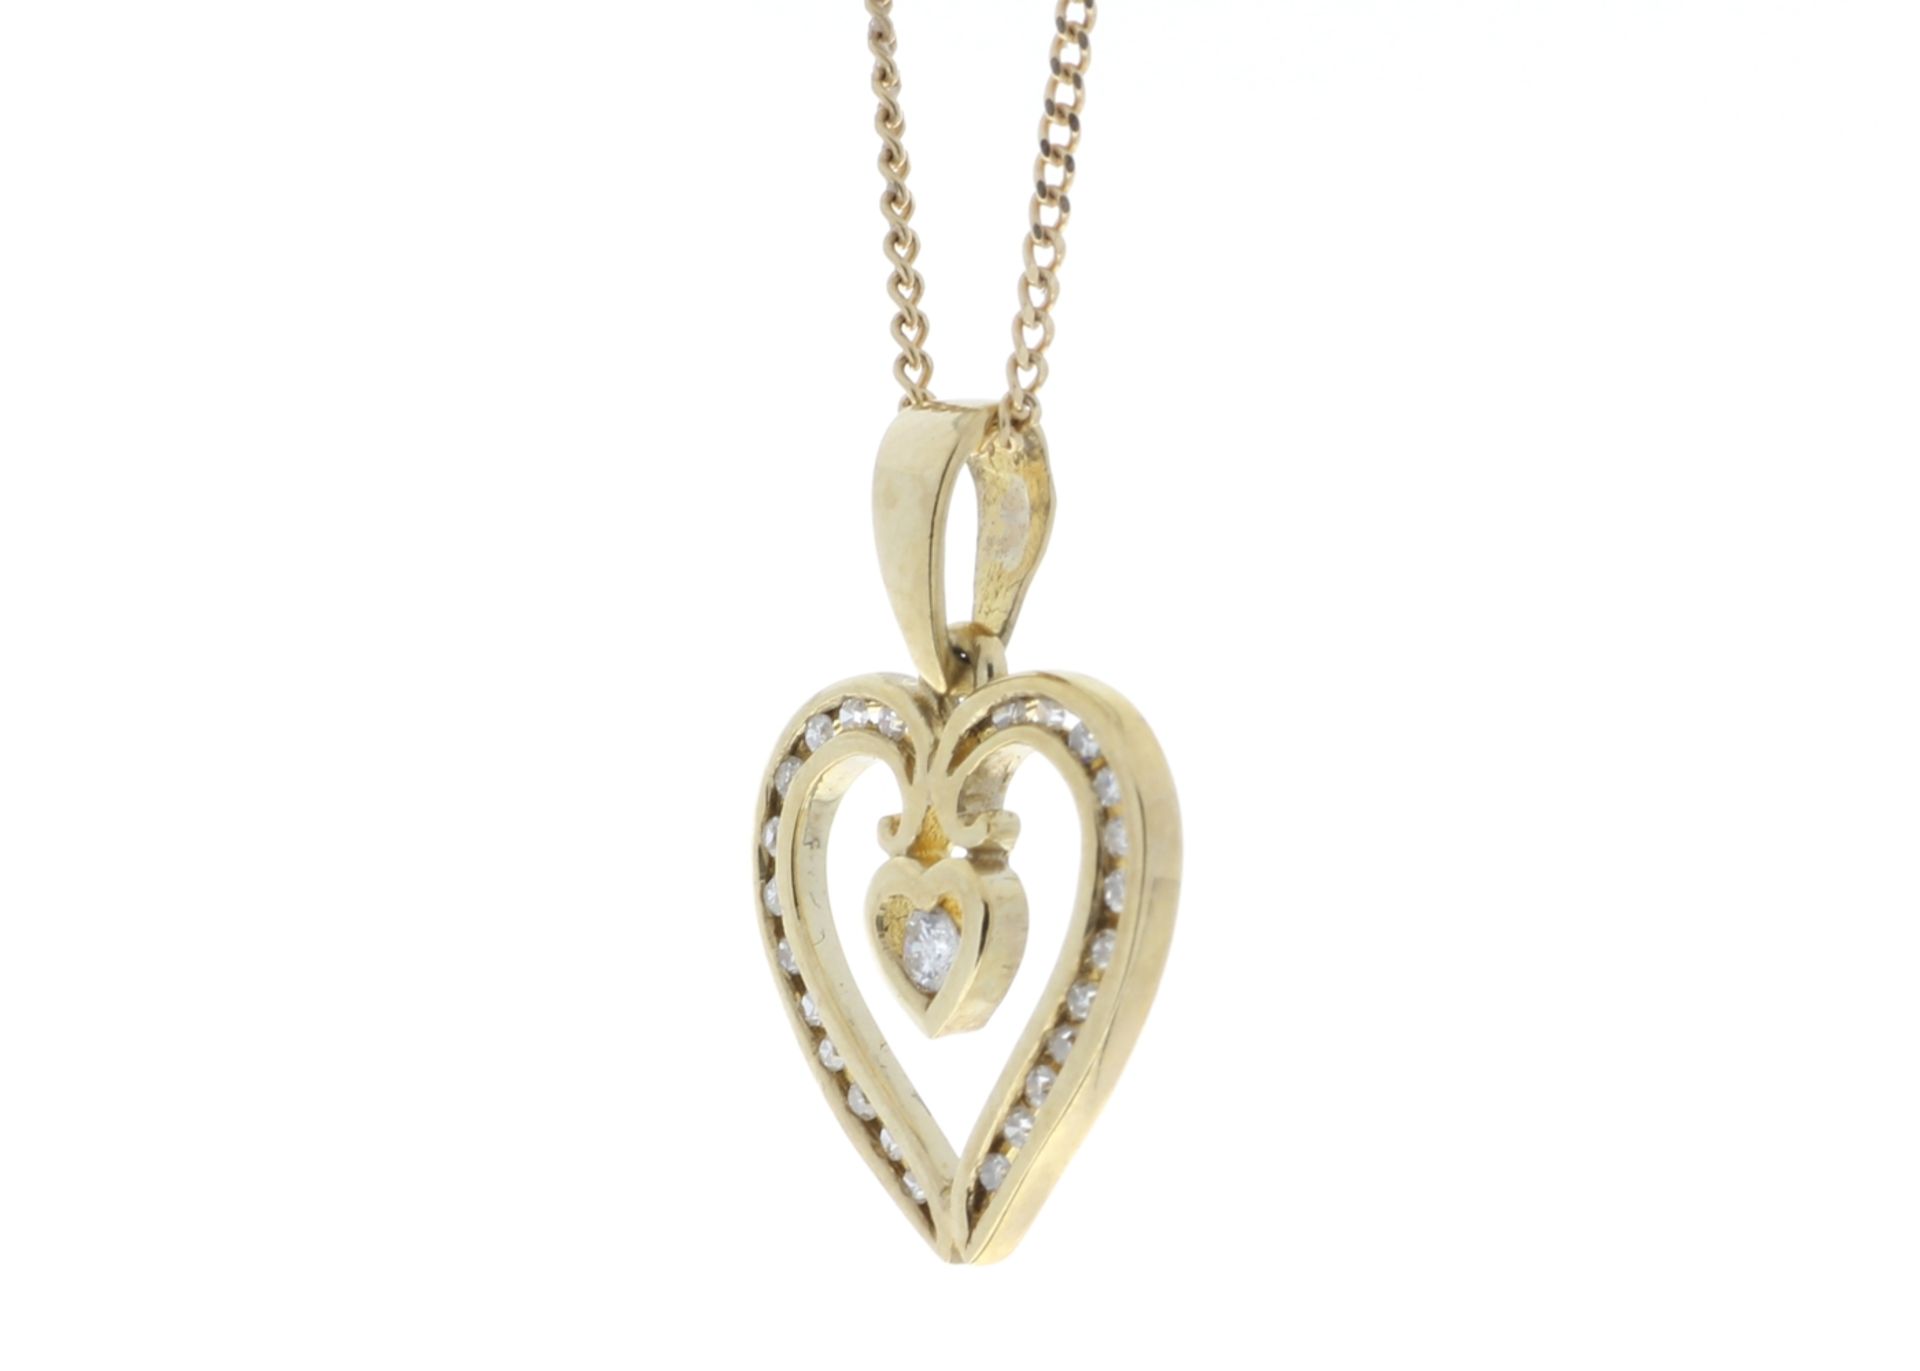 9ct Yellow Gold Heart Shaped Pendant Set With Diamonds 0.16 Carats - Valued by GIE £1,145.00 - 9ct - Image 4 of 5